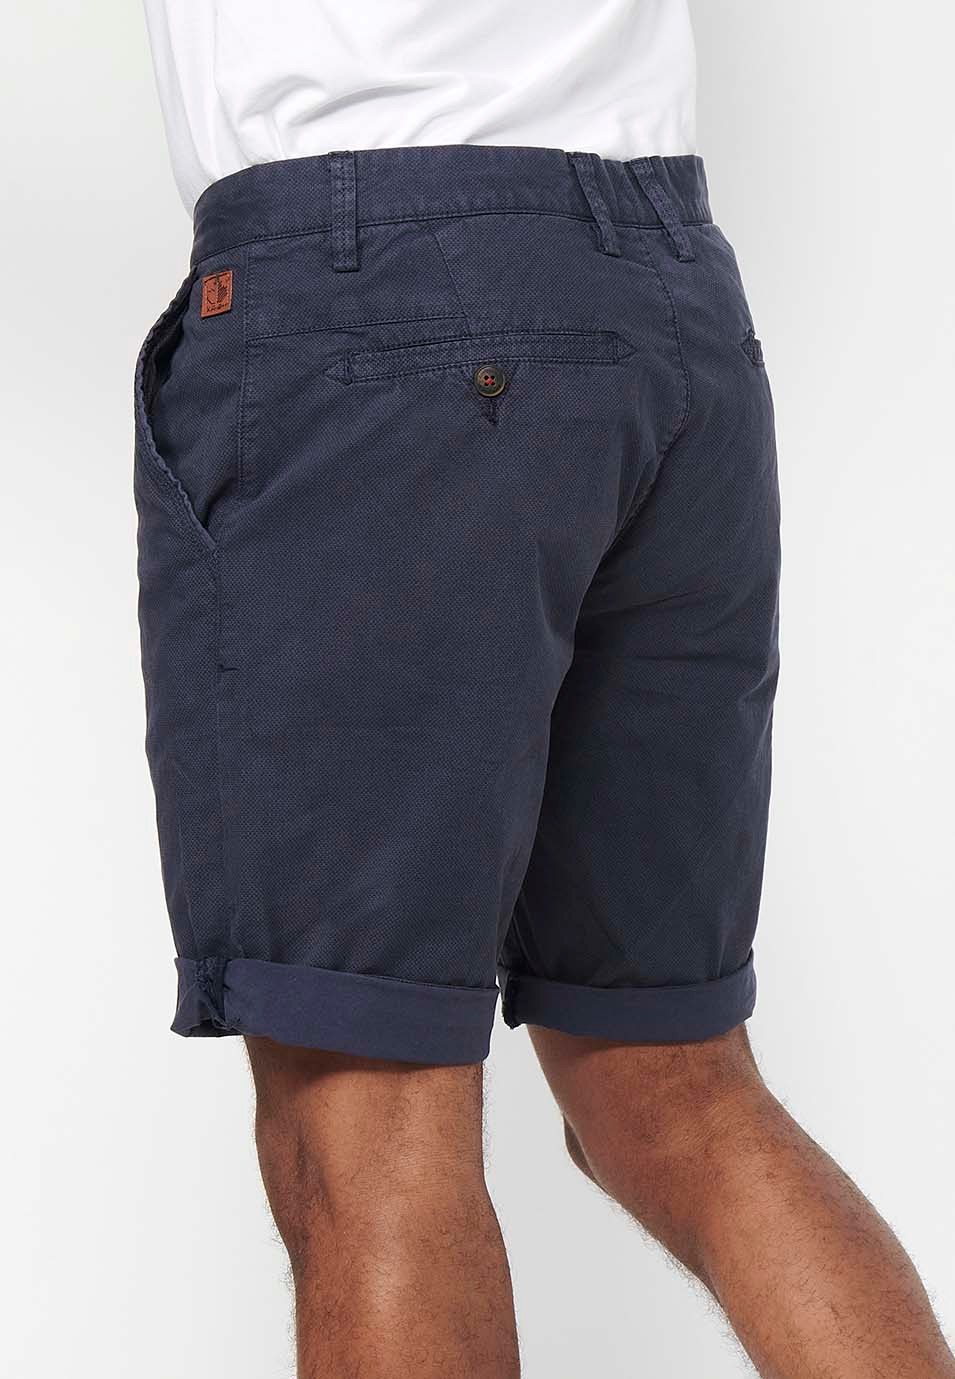 Bermuda Chino shorts with turn-up finish with front zipper and button closure with four pockets in Navy Color for Men 4